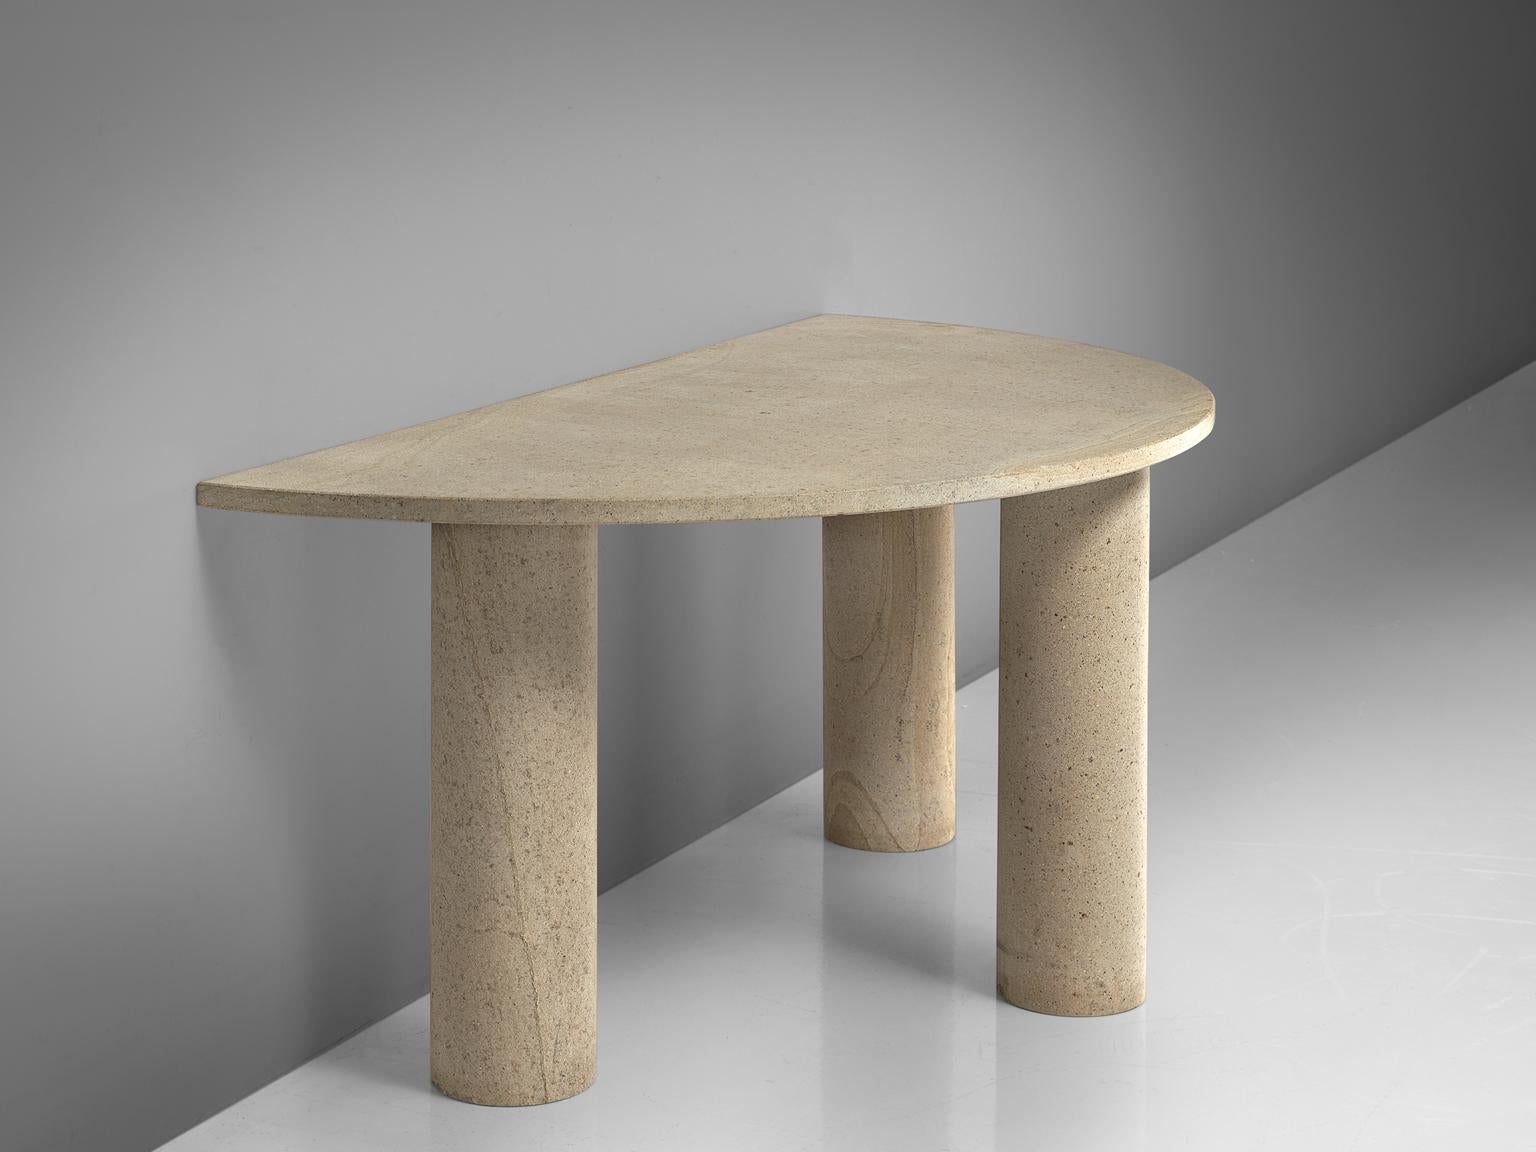 Console, granite, Italy, early 1990s.

This simplistic, archetypical console table has a half circle tabletop. It has strong architectural features such as cone shaped legs. The circular top is small in comparison to the legs, giving this table a